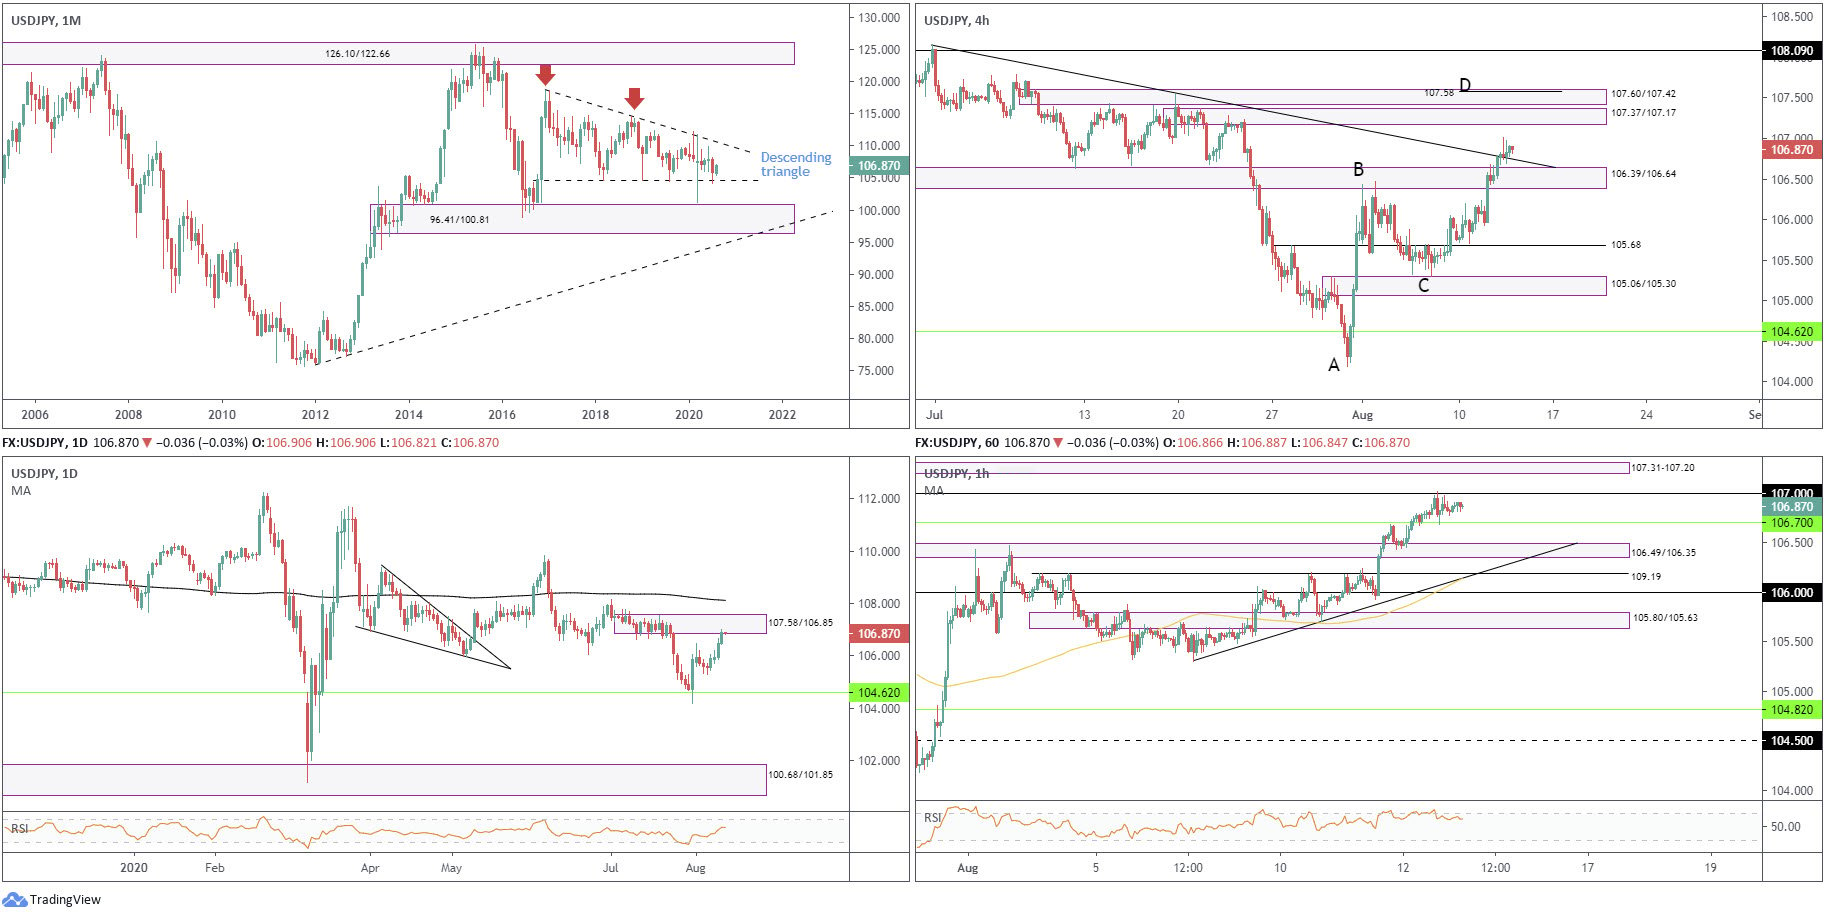 August 13th 2020: H4 Head and Shoulder’s Top Pattern in Play on GBP/USD, FP Markets